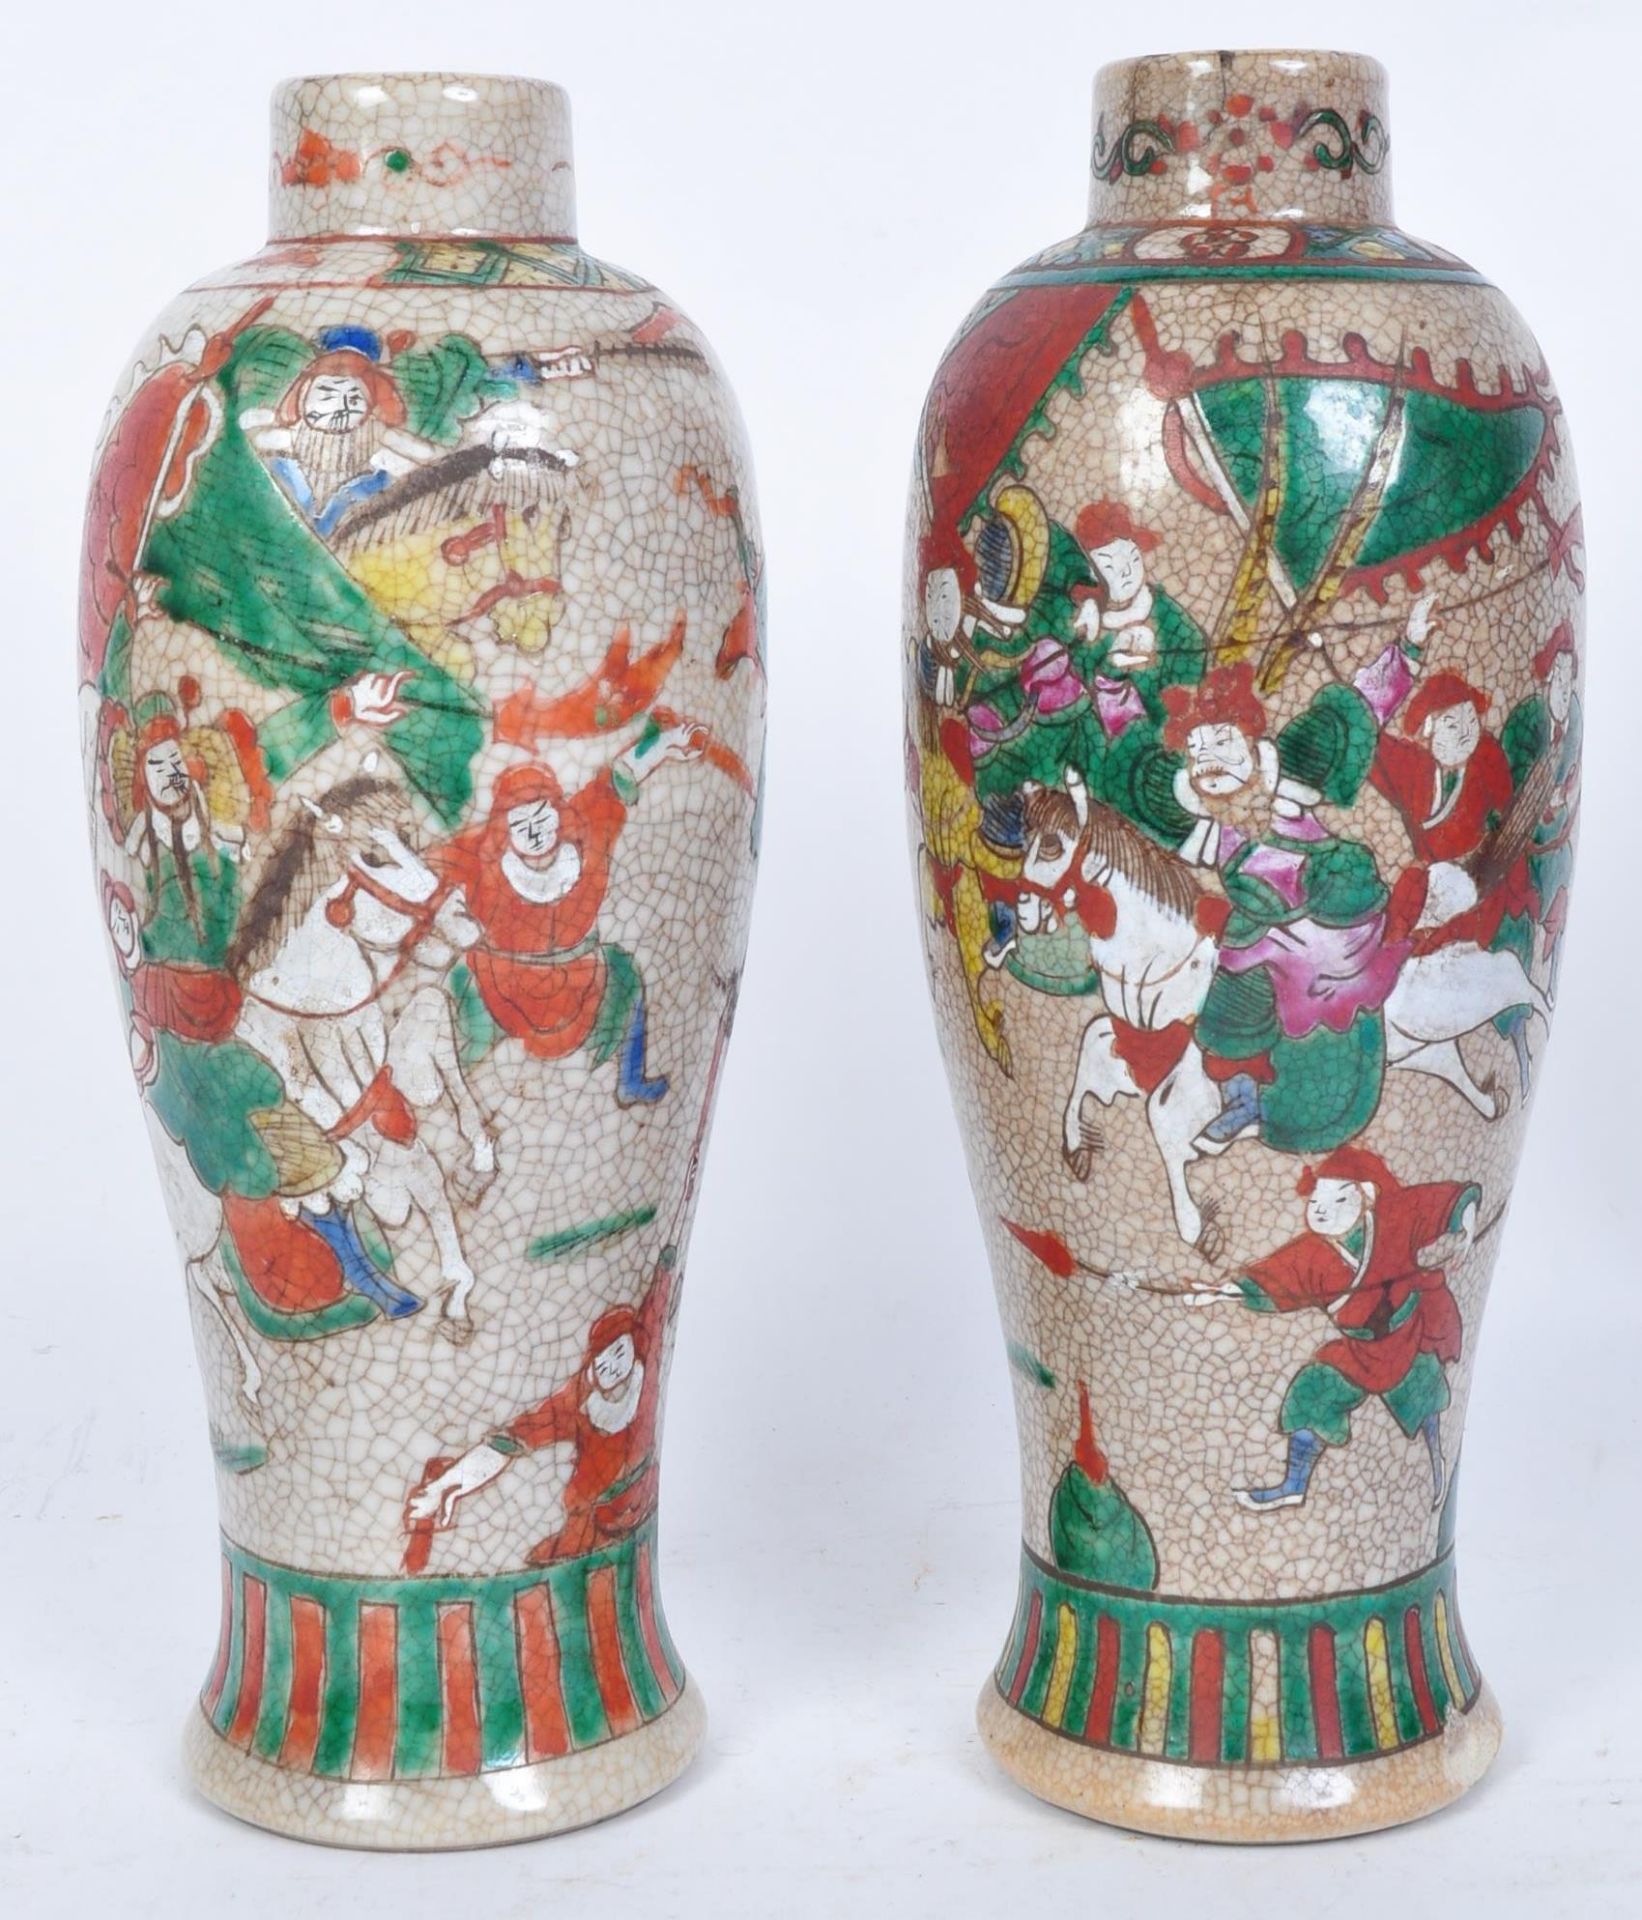 PAIR OF 19TH CENTURY CHINESE CRACKLE GLAZE VASES